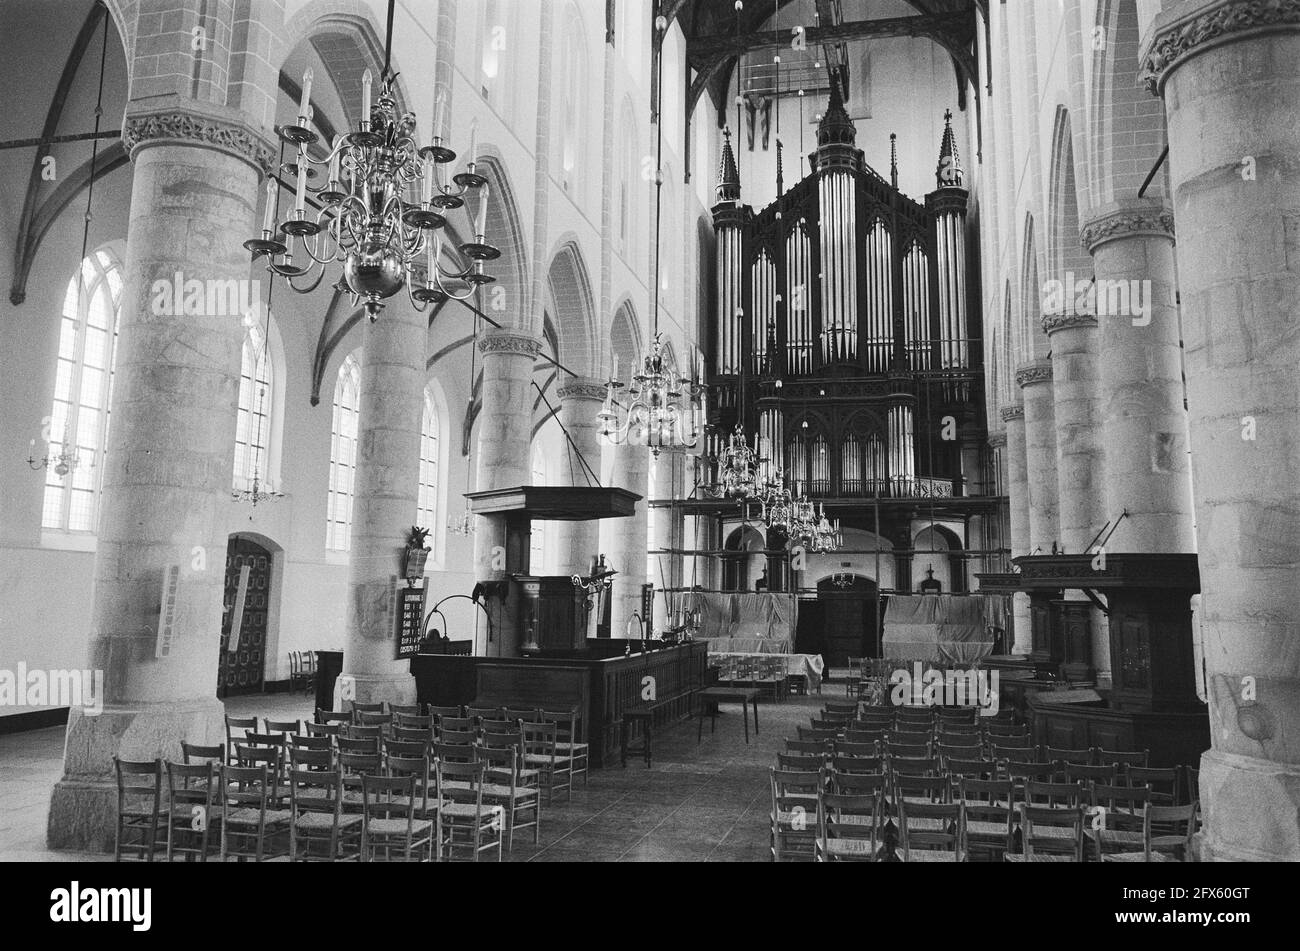 Grote of St. Vituskerk in Naarden restored; interior of church, November 23, 1978, churches, The Netherlands, 20th century press agency photo, news to remember, documentary, historic photography 1945-1990, visual stories, human history of the Twentieth Century, capturing moments in time Stock Photo